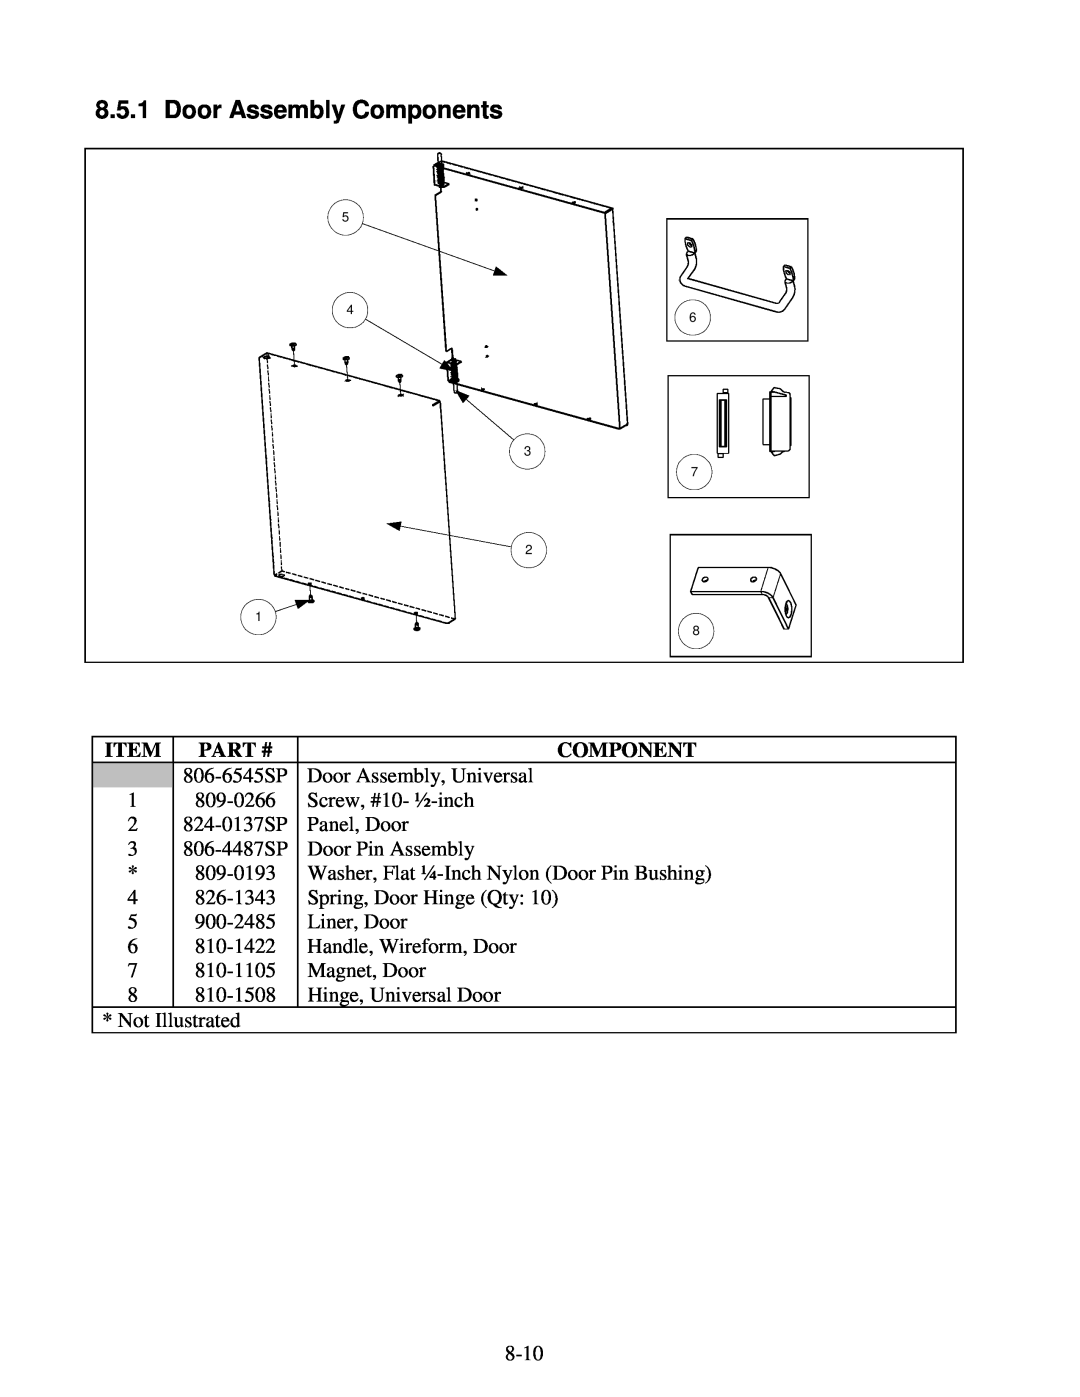 Frymaster H14 Series service manual Door Assembly Components, Part #, 806-6545SP, 824-0137SP, 806-4487SP, 810-1422 